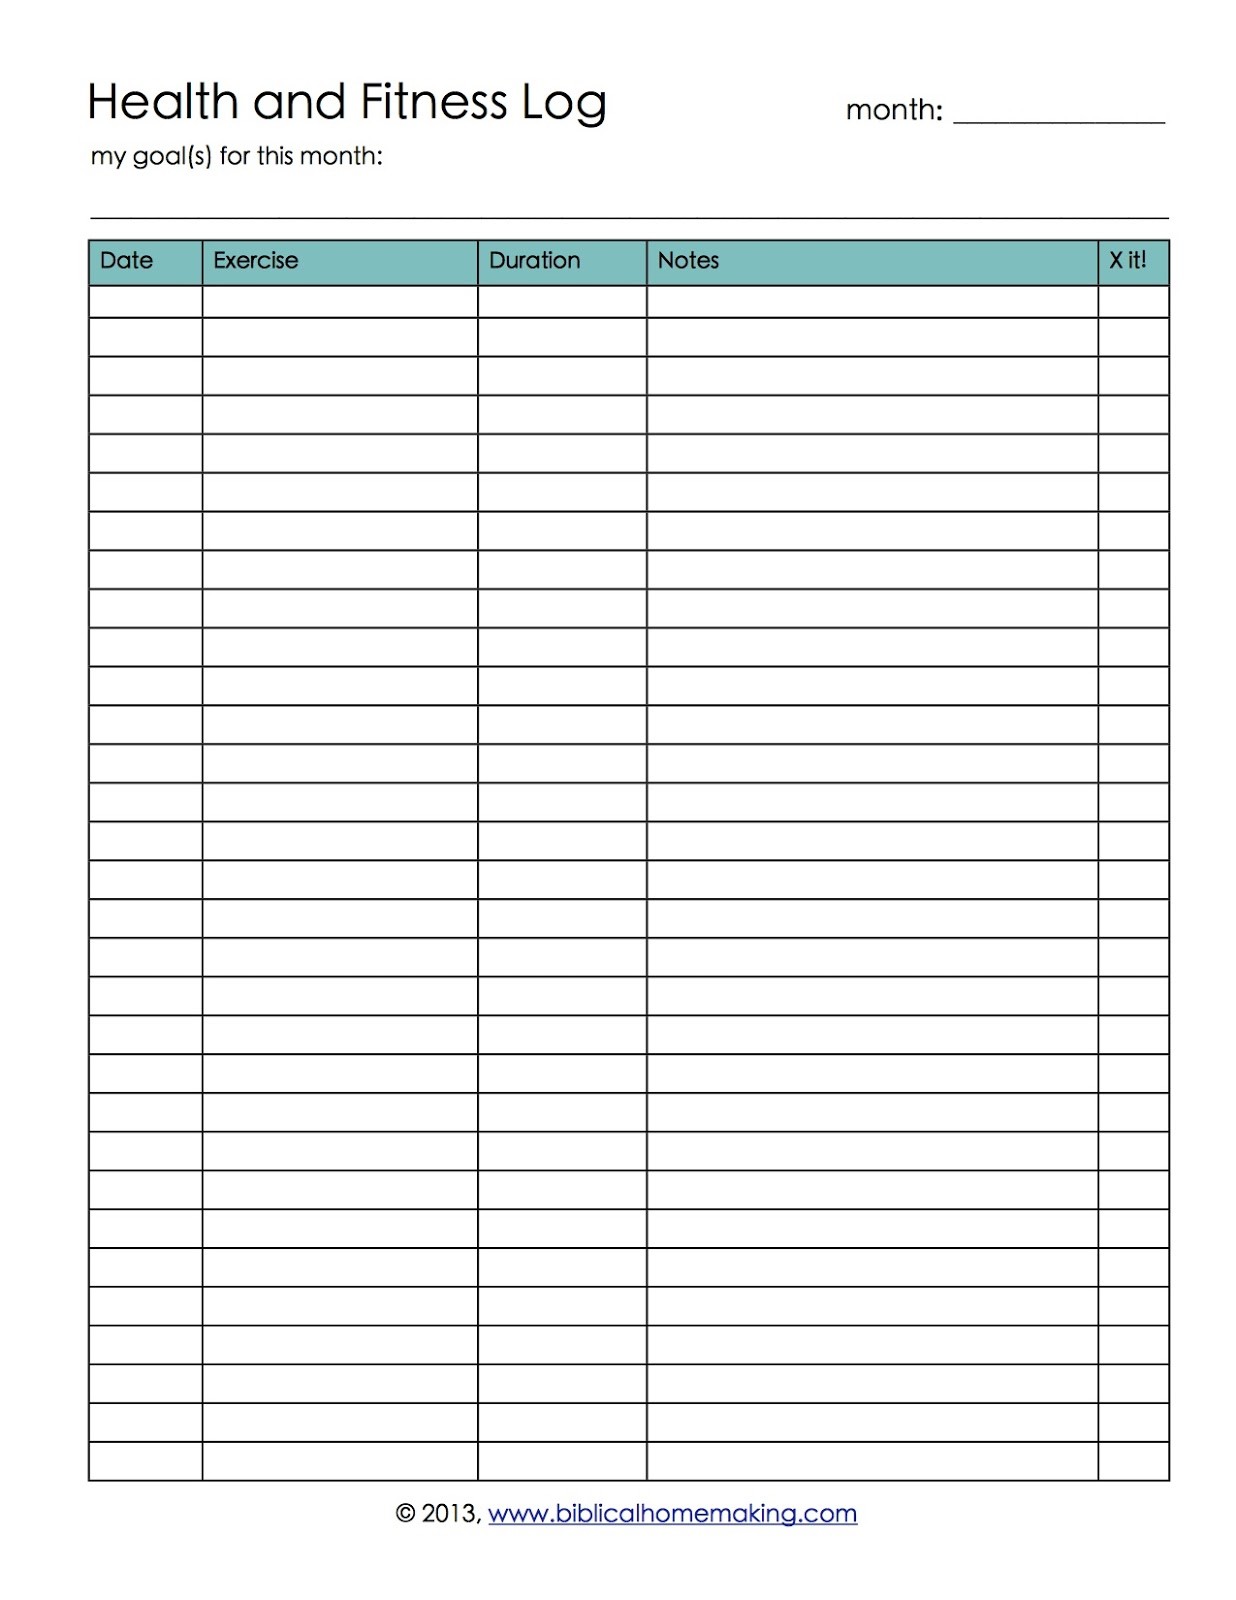 Weight Loss Challenge Sign Up Sheet Template LAOBING KAISUO Tag Document